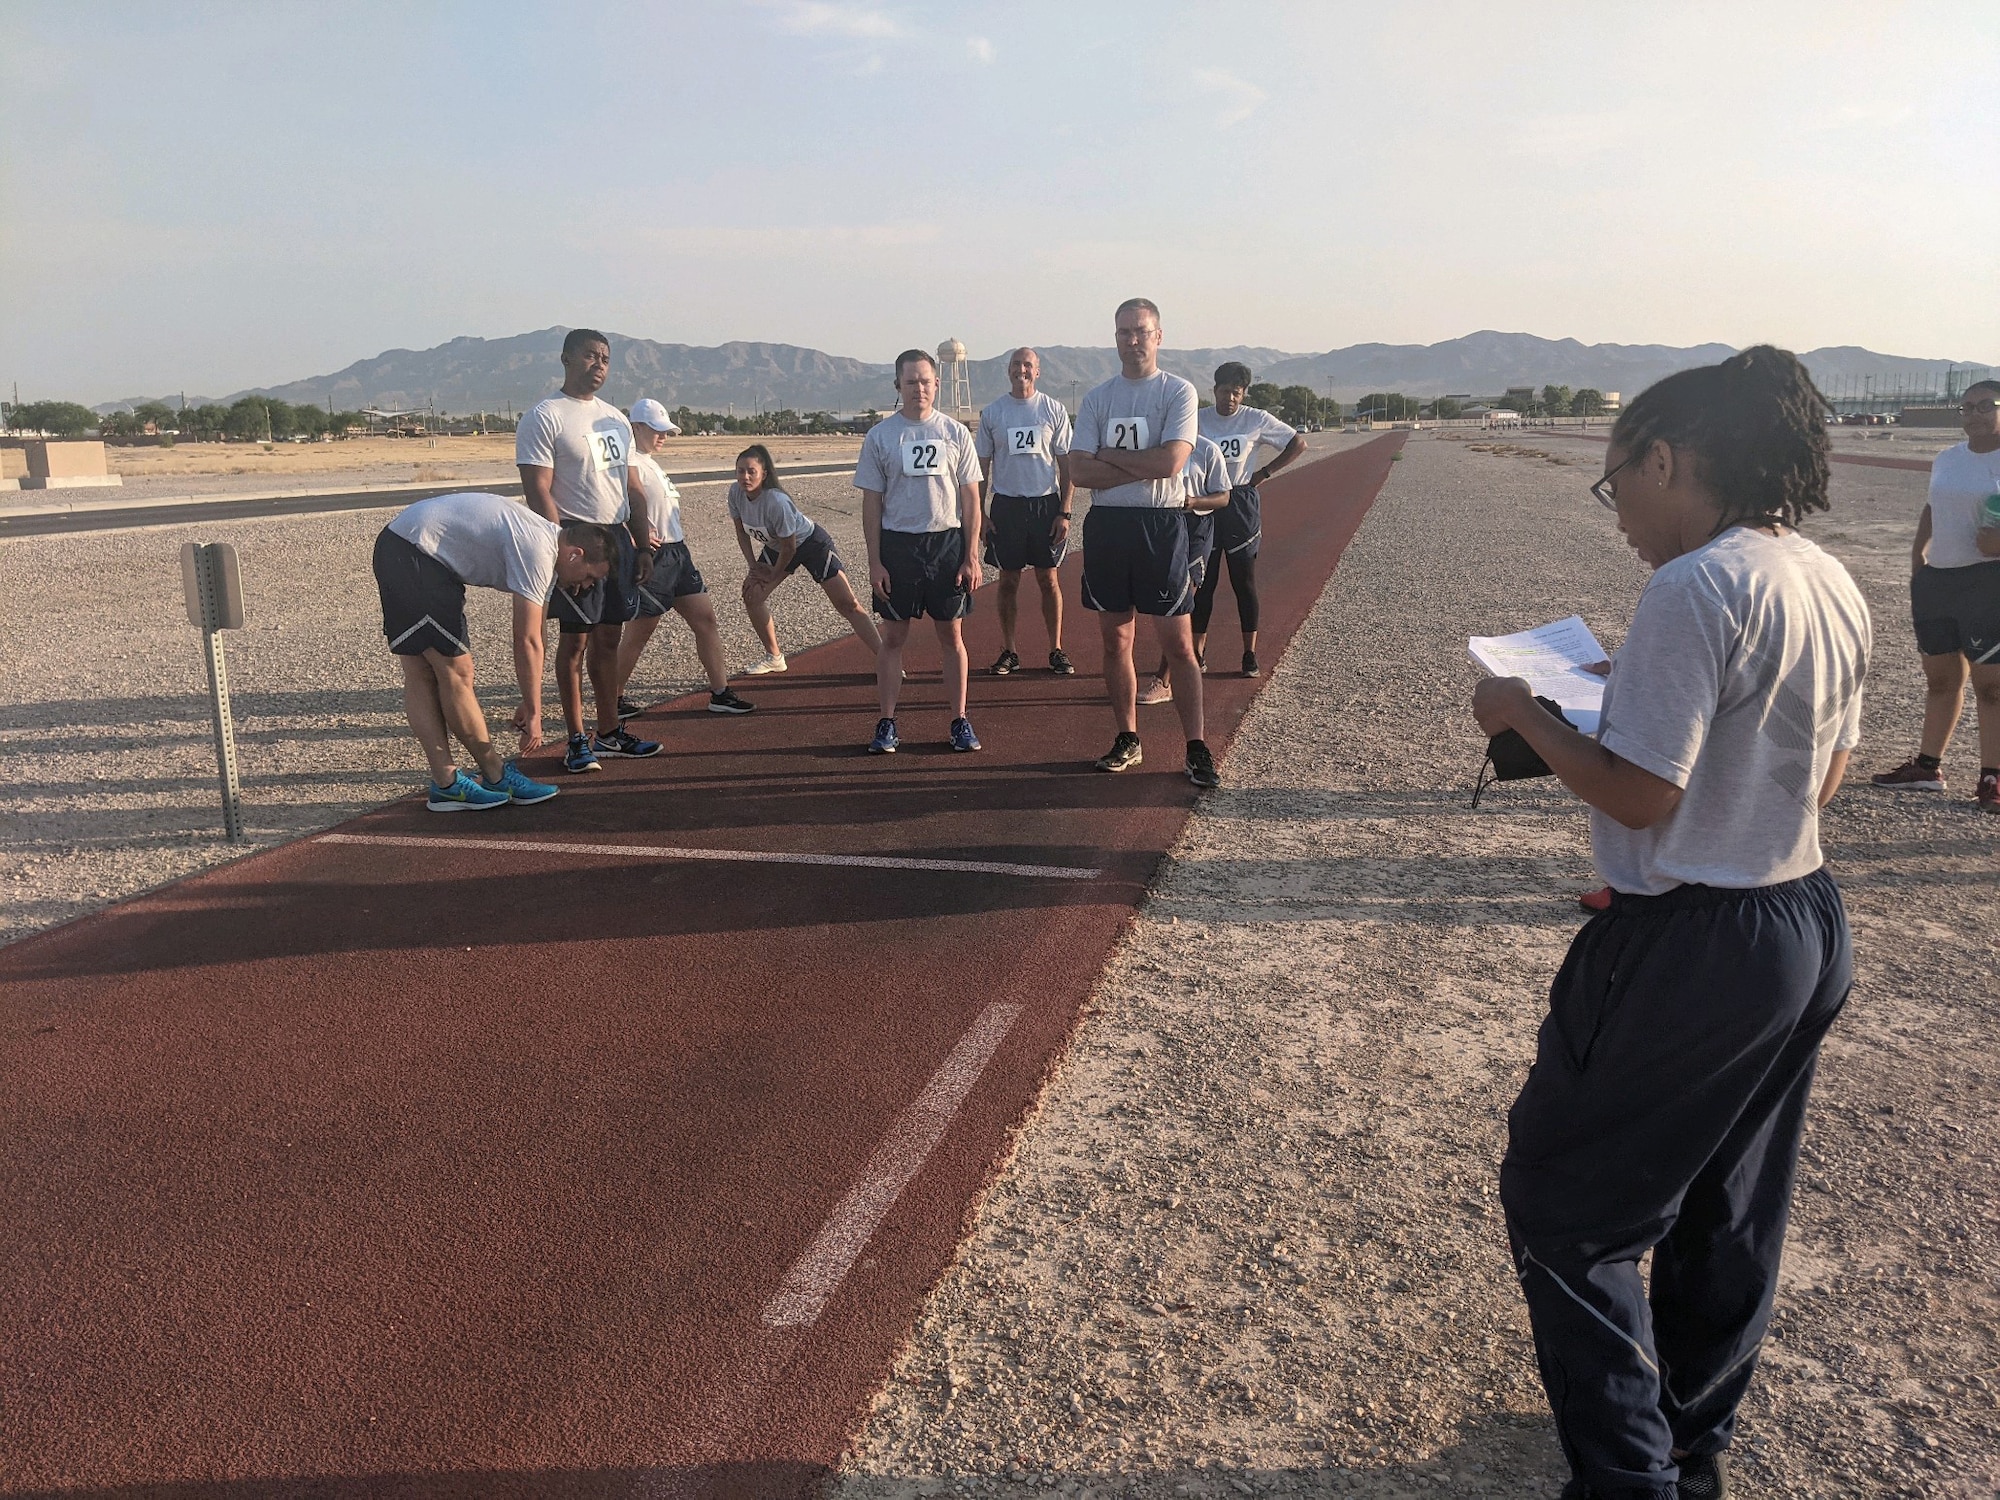 926th Wing Reserve Citizen Airmen perform a diagnostic physical fitness test June 15, at Nellis Air Force Base, Nevada. (U.S. Air Force photo by Dan Mena)